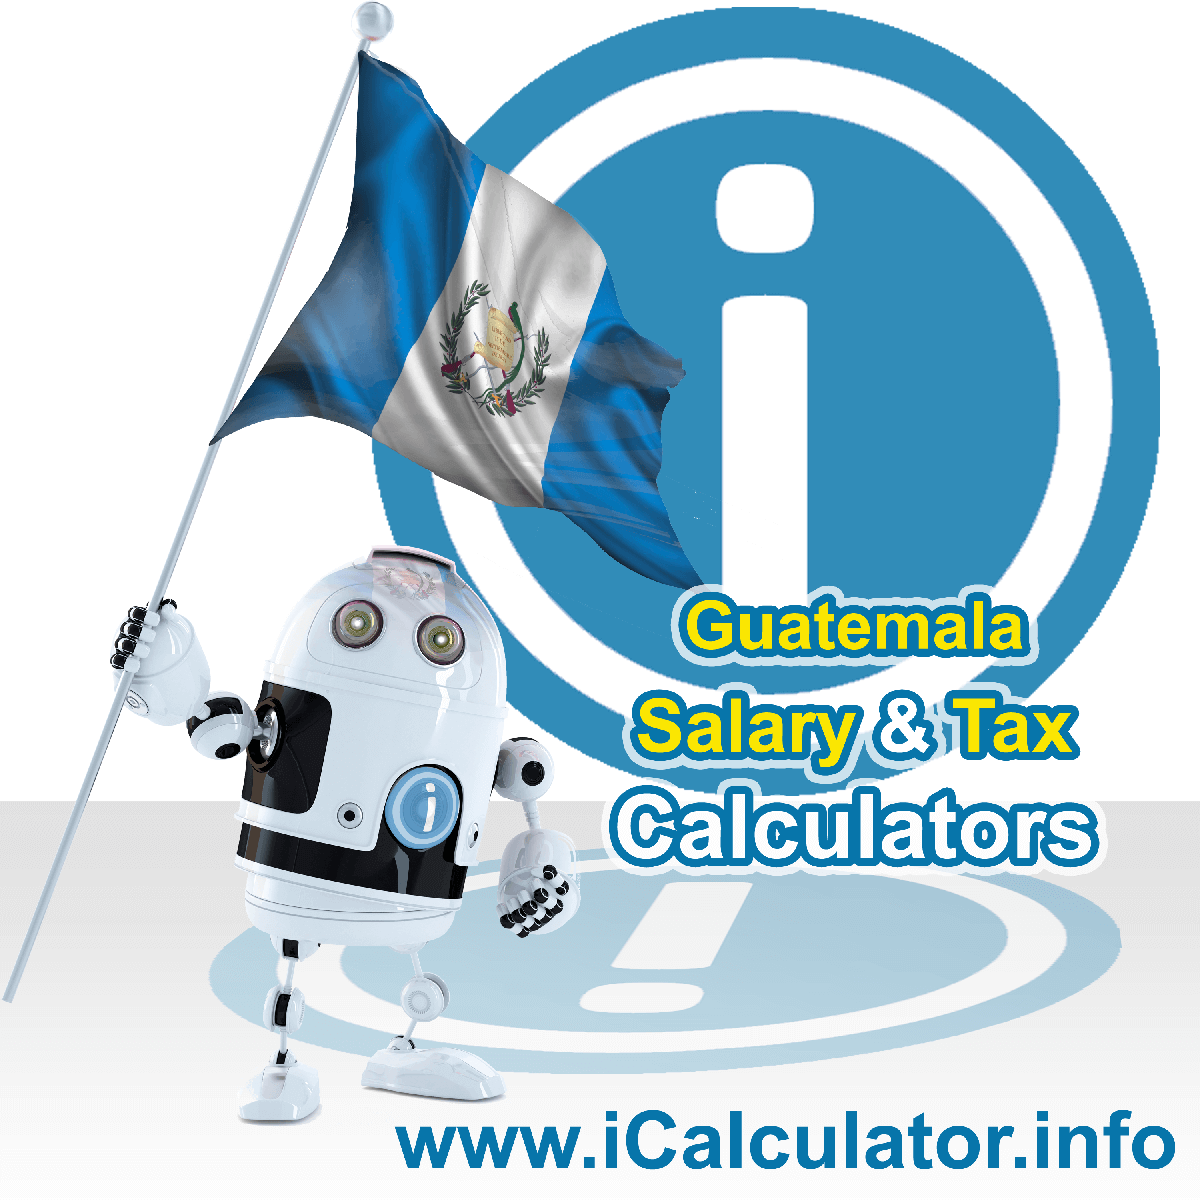 Guatemala Salary Calculator. This image shows the Guatemalaese flag and information relating to the tax formula for the Guatemala Tax Calculator